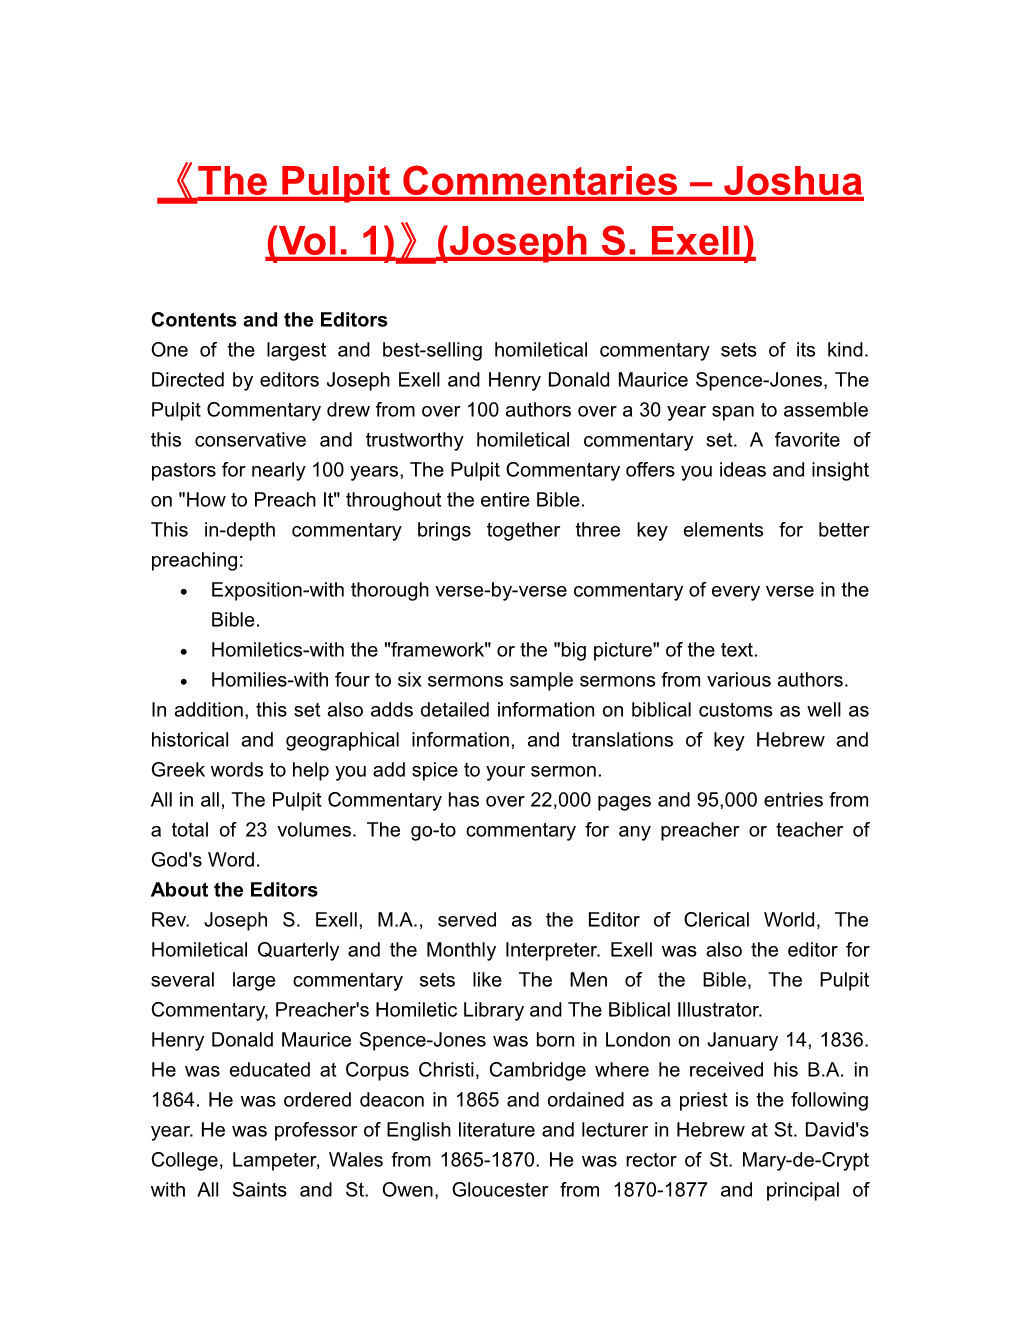 The Pulpit Commentaries Joshua (Vol. 1) (Joseph S. Exell)